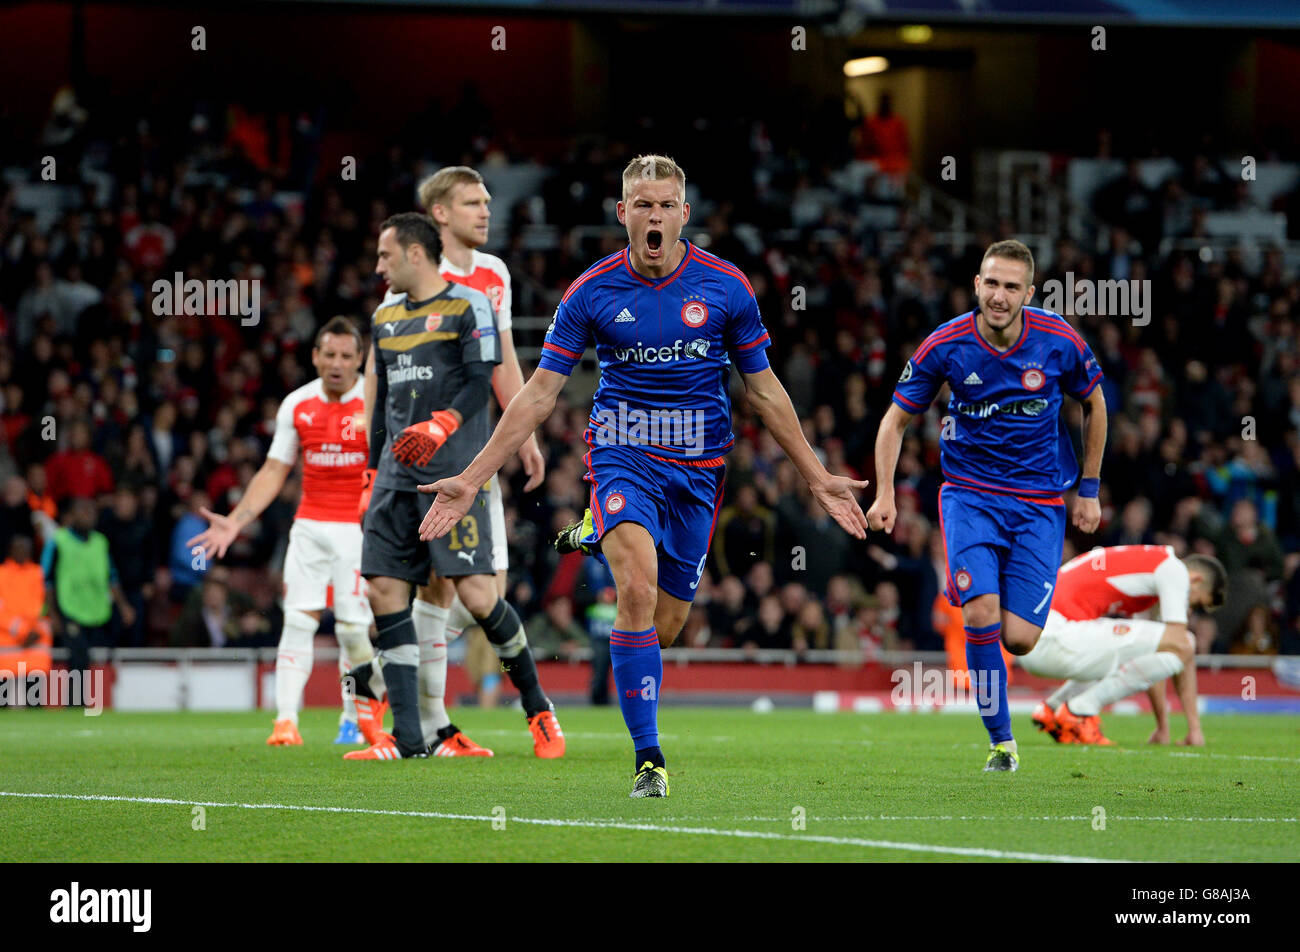 Soccer - UEFA Champions League - Group F - Arsenal v Olympiacos - Emirates Stadium. Olympiacos' Alfred Finnbogason celebrates after scoring their third goal Stock Photo